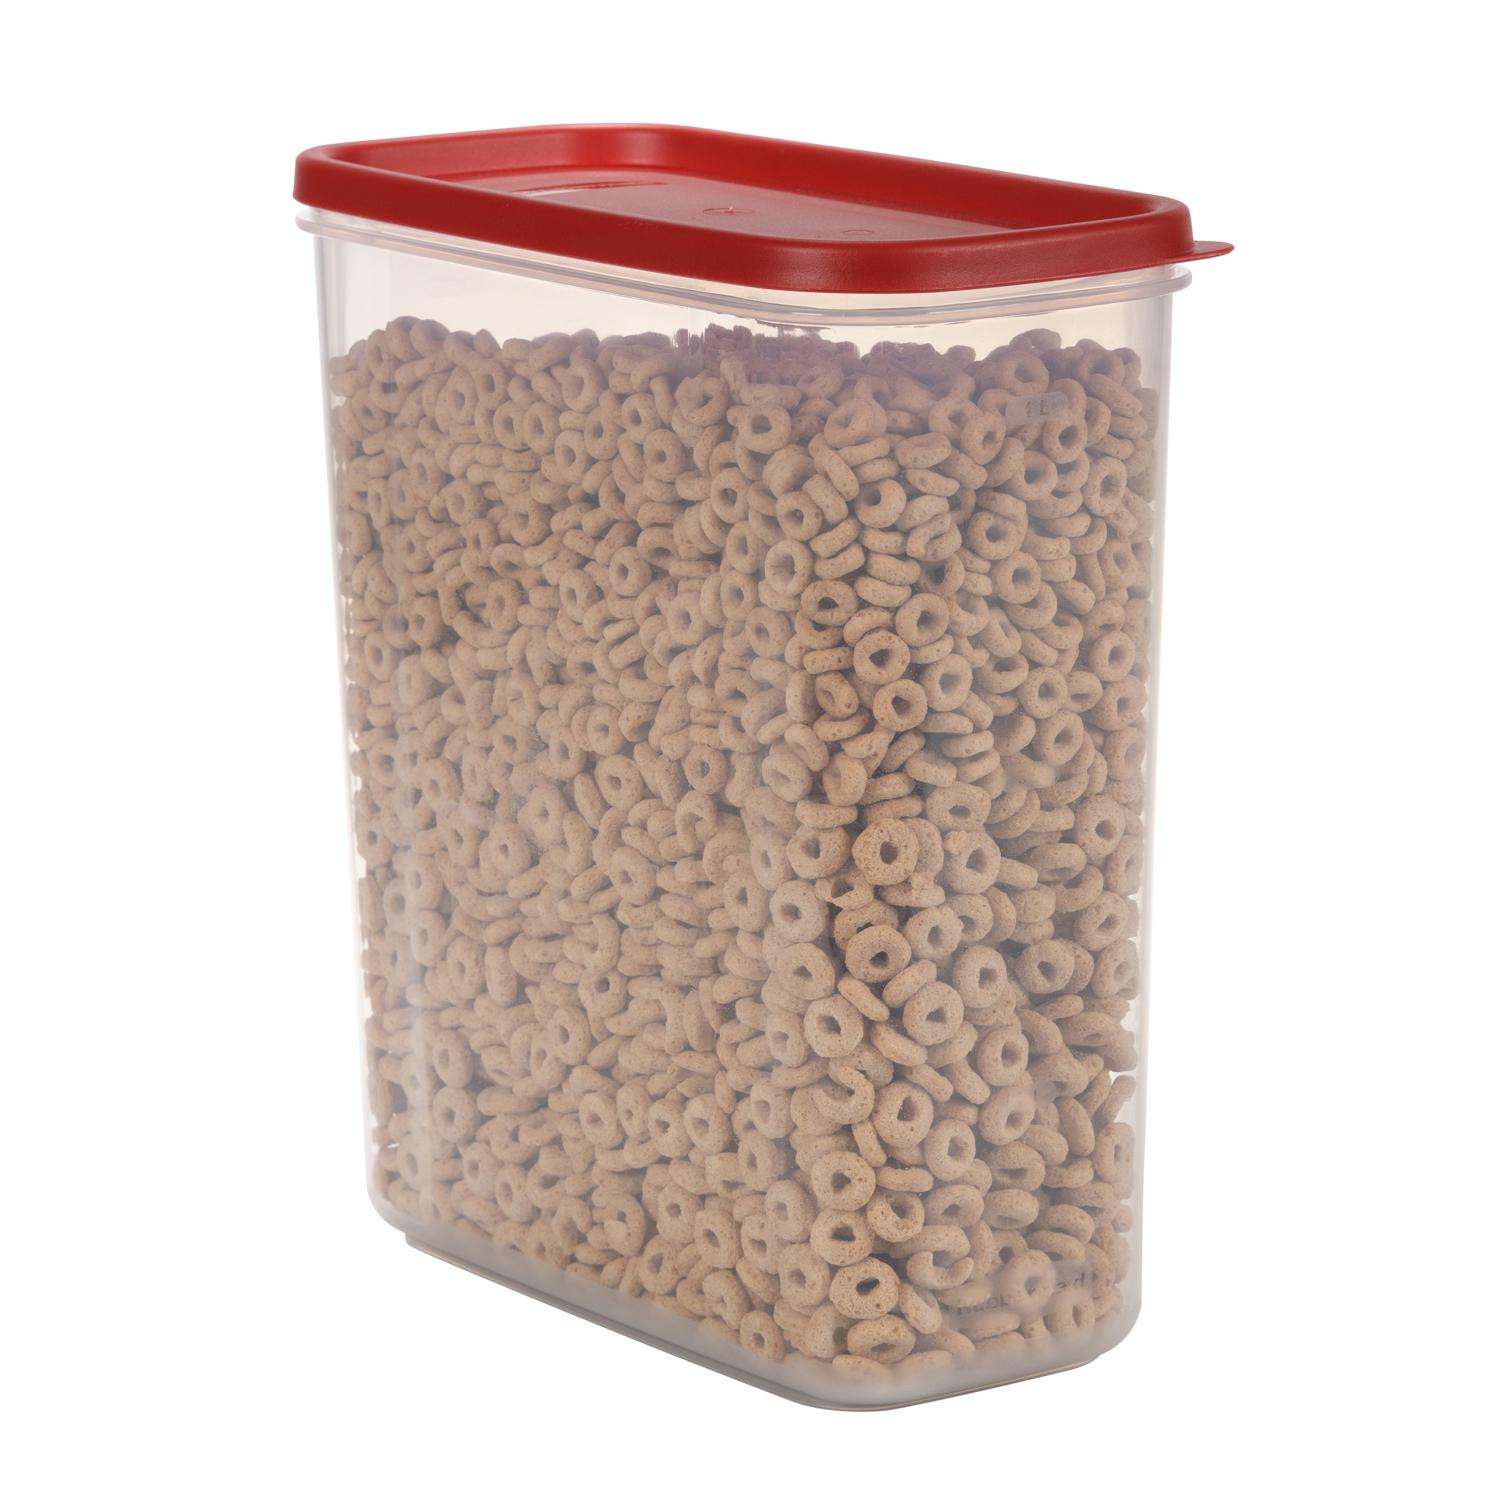 Food Storage Containers - Squares, Rounds and Food Boxes